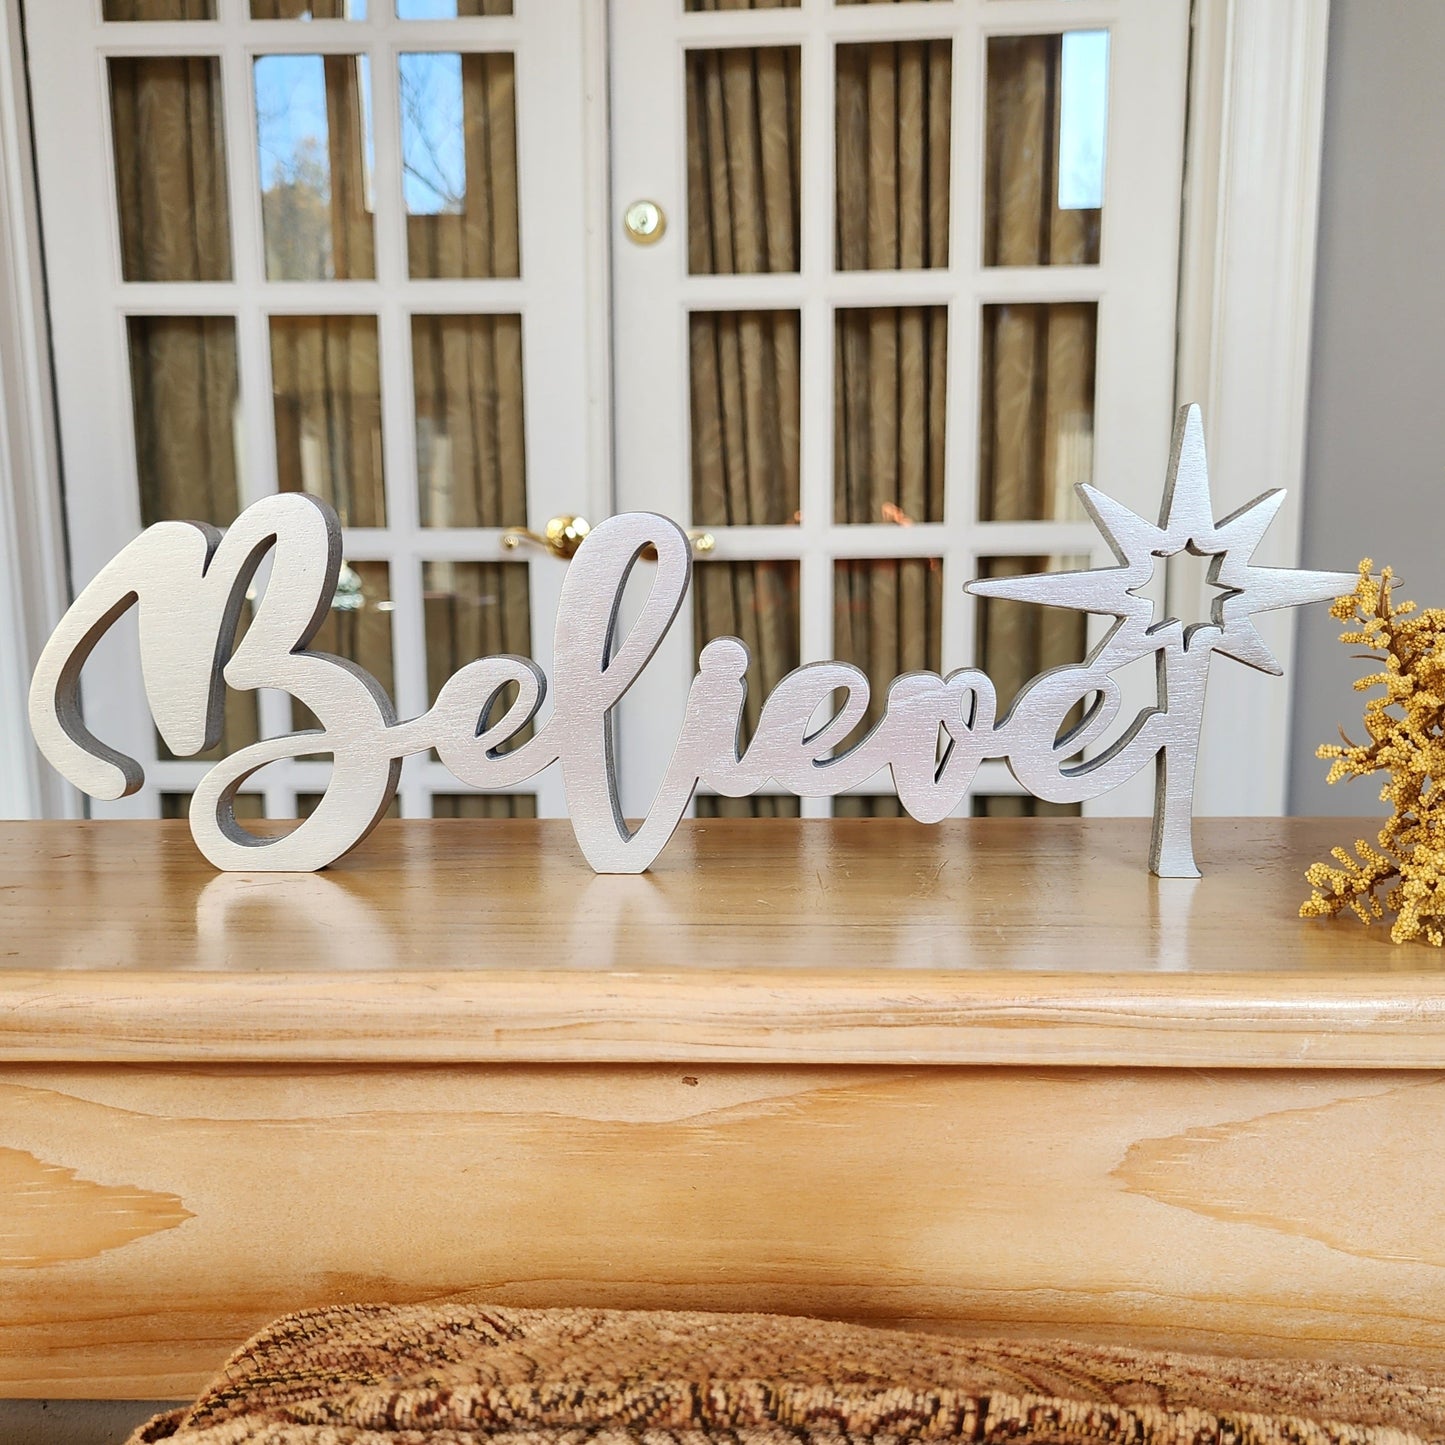 Free-standing wood Believe sign